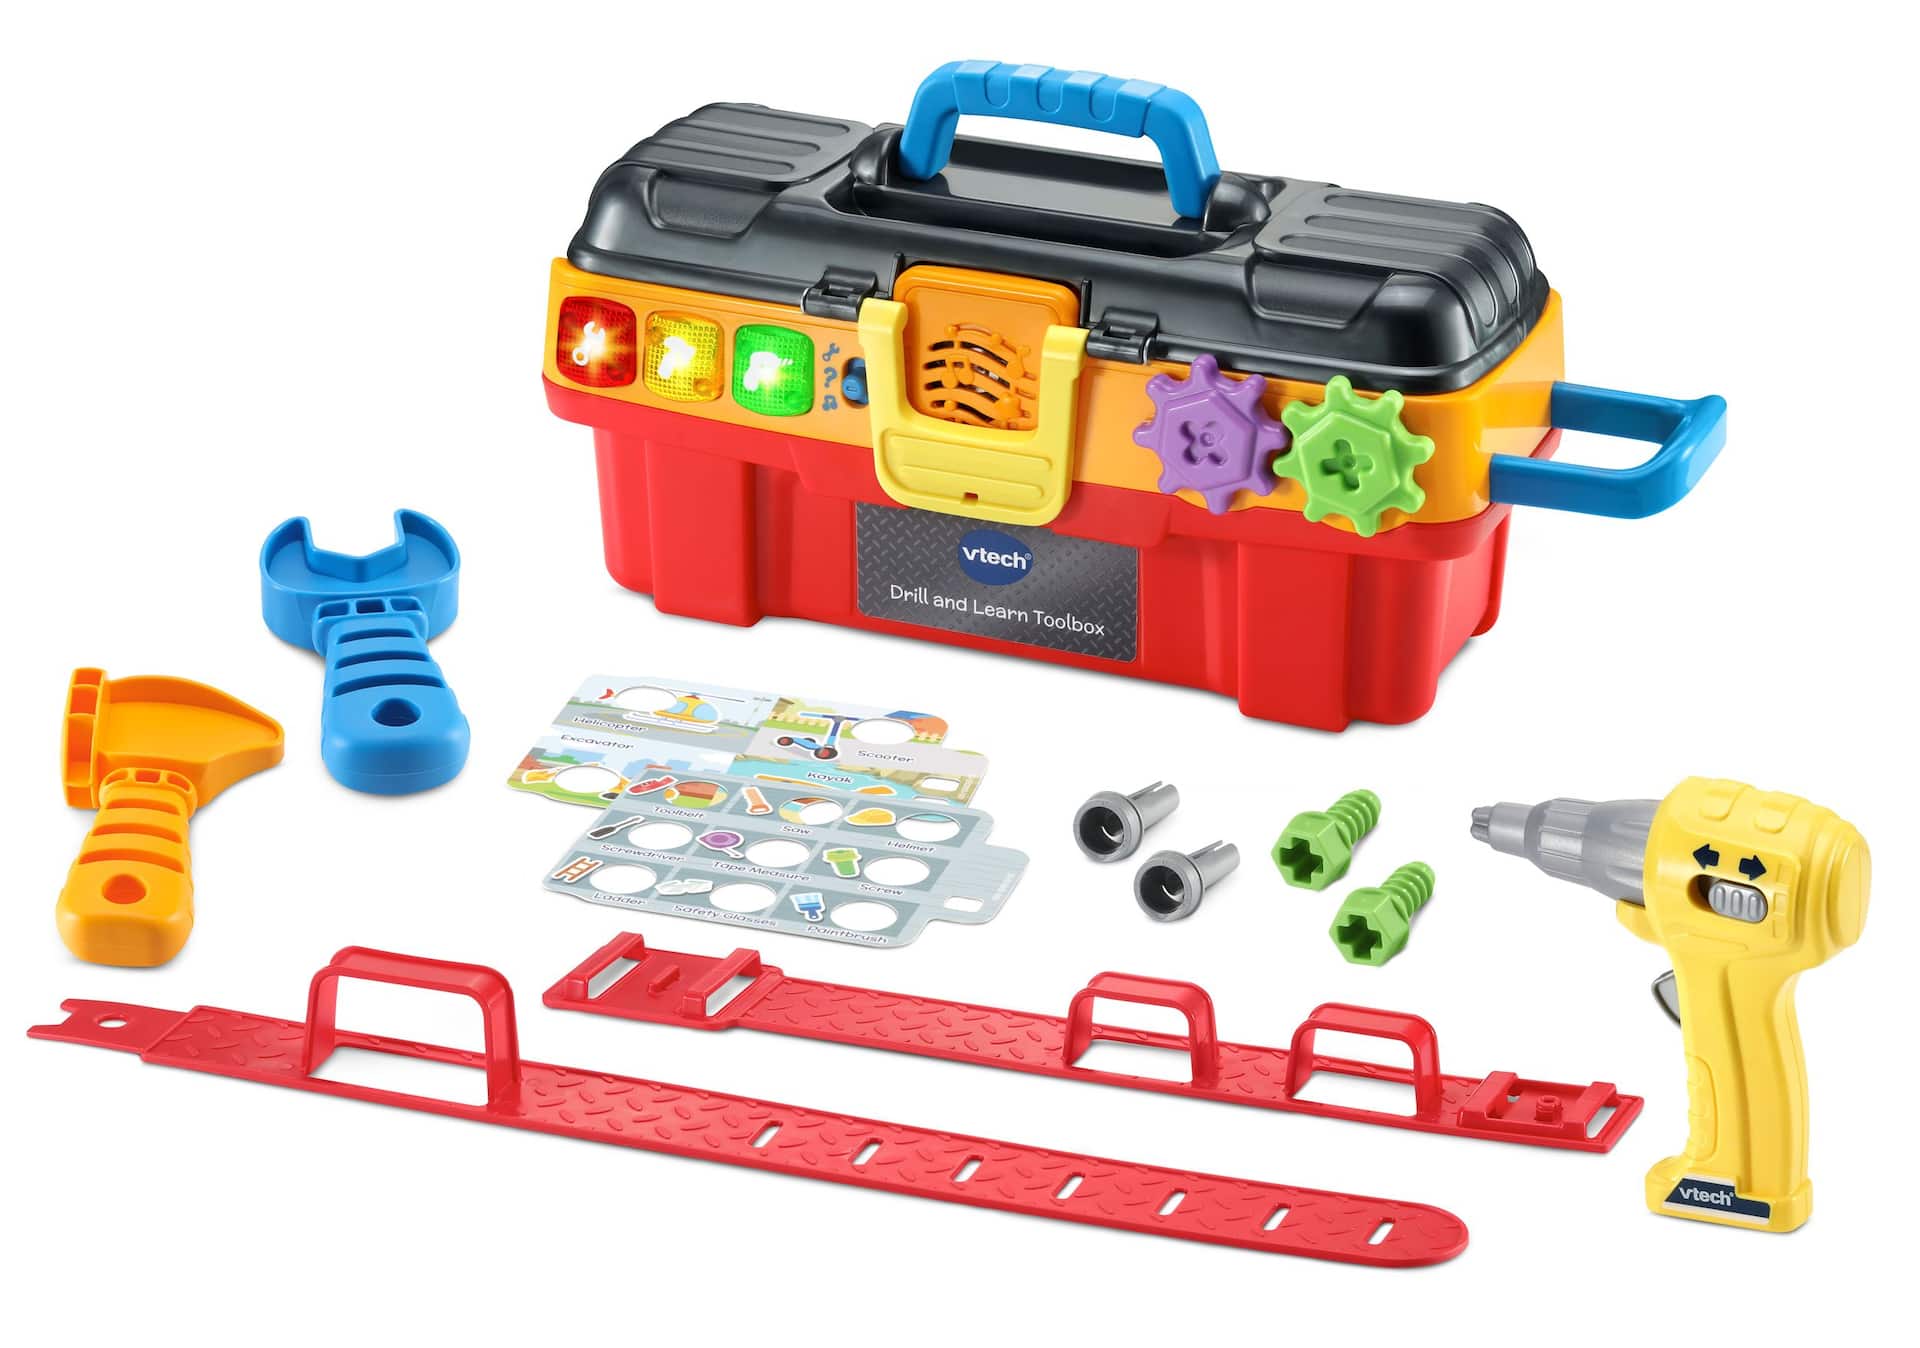 VTech Drill & Learn Toolbox Pro, English | Canadian Tire